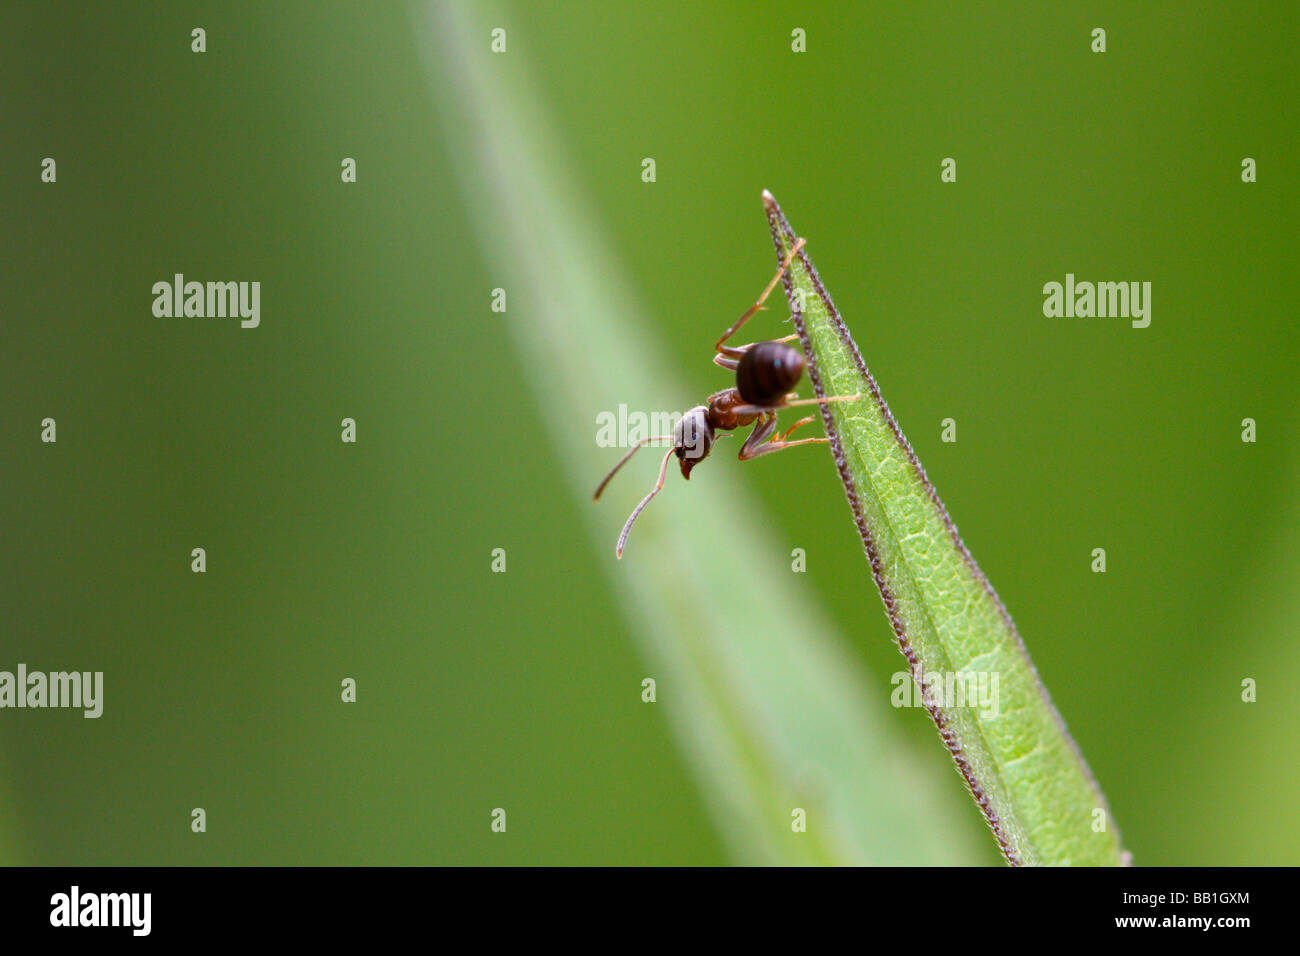 Lasius niger, the black garden ant, on a leaf Stock Photo